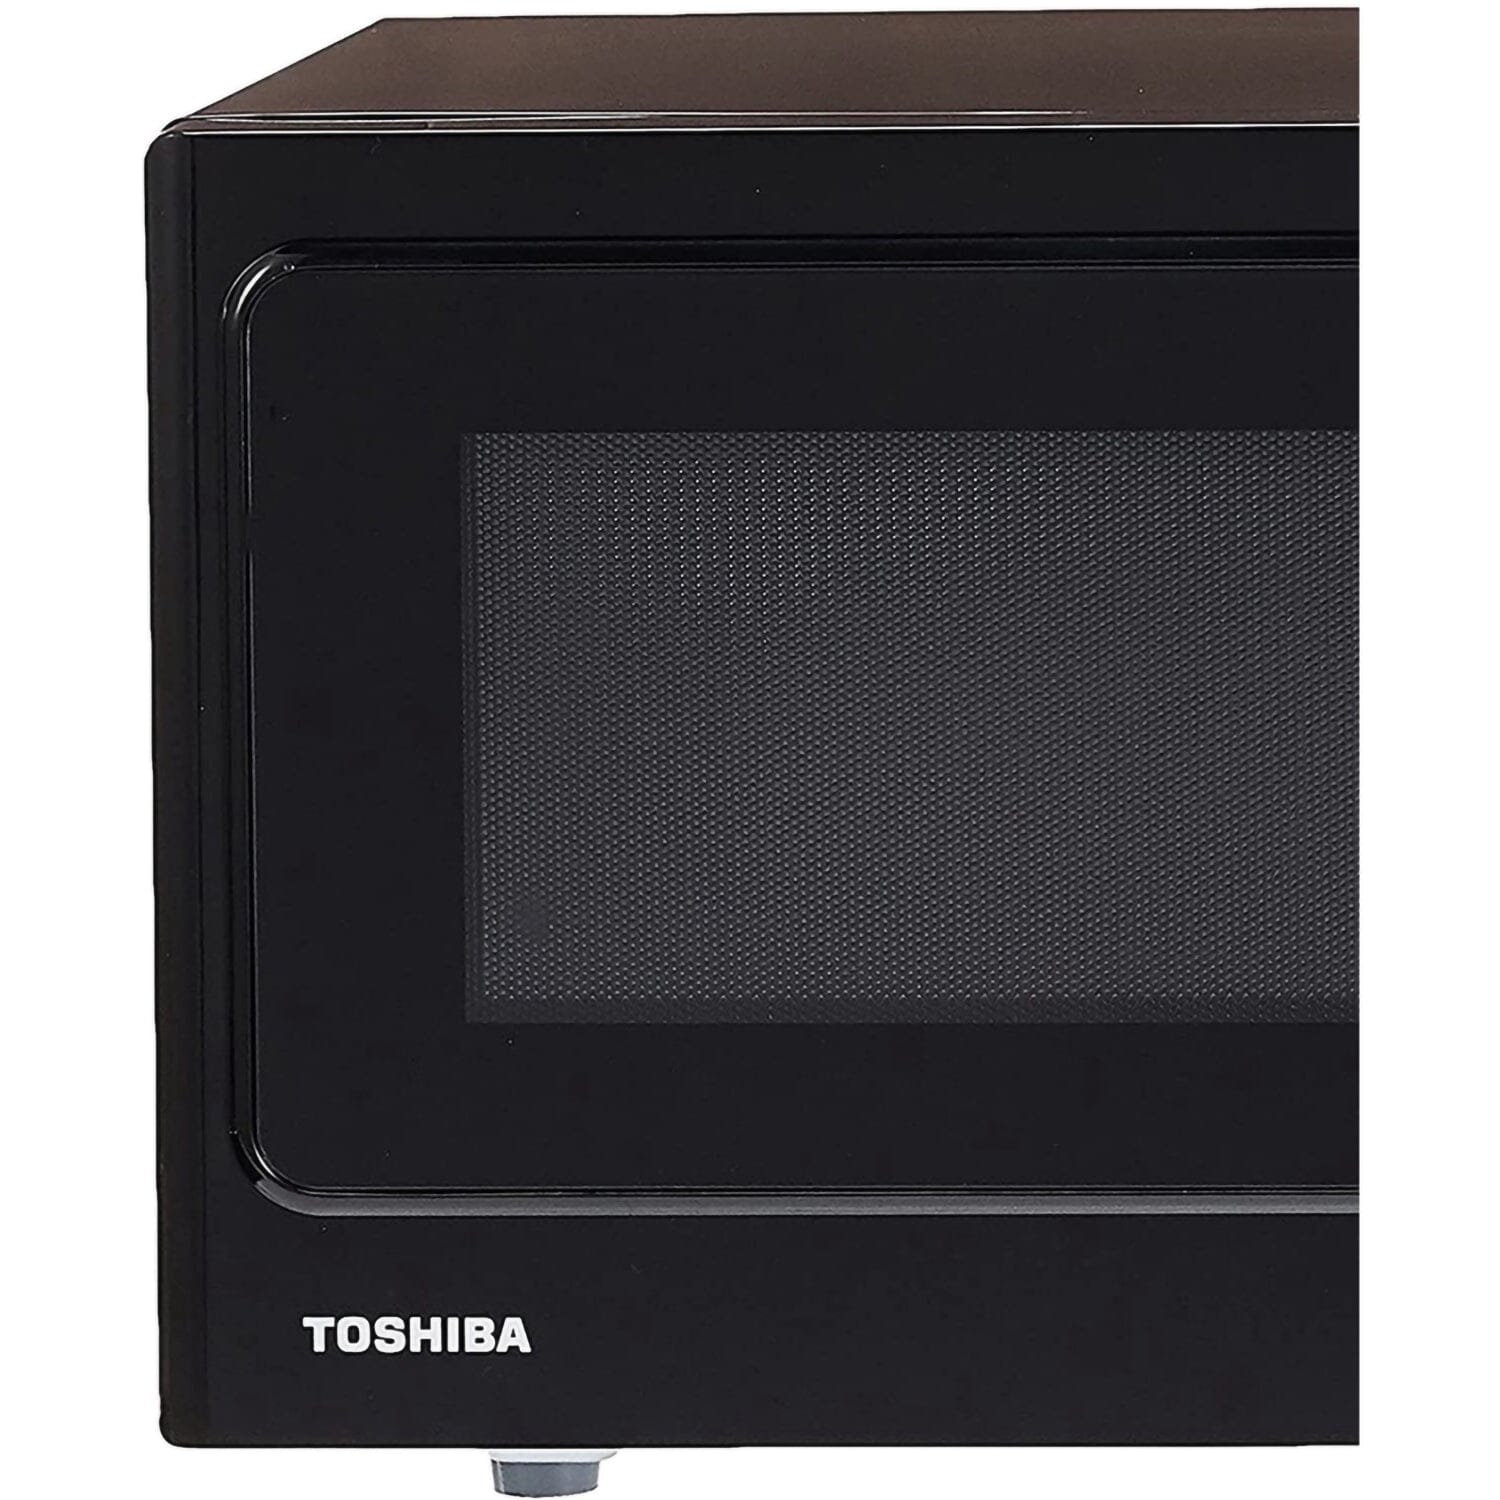 Toshiba 25L MM-EG25P(BK) 2-in-1 Microwave Oven with Grill Oven Toshiba 